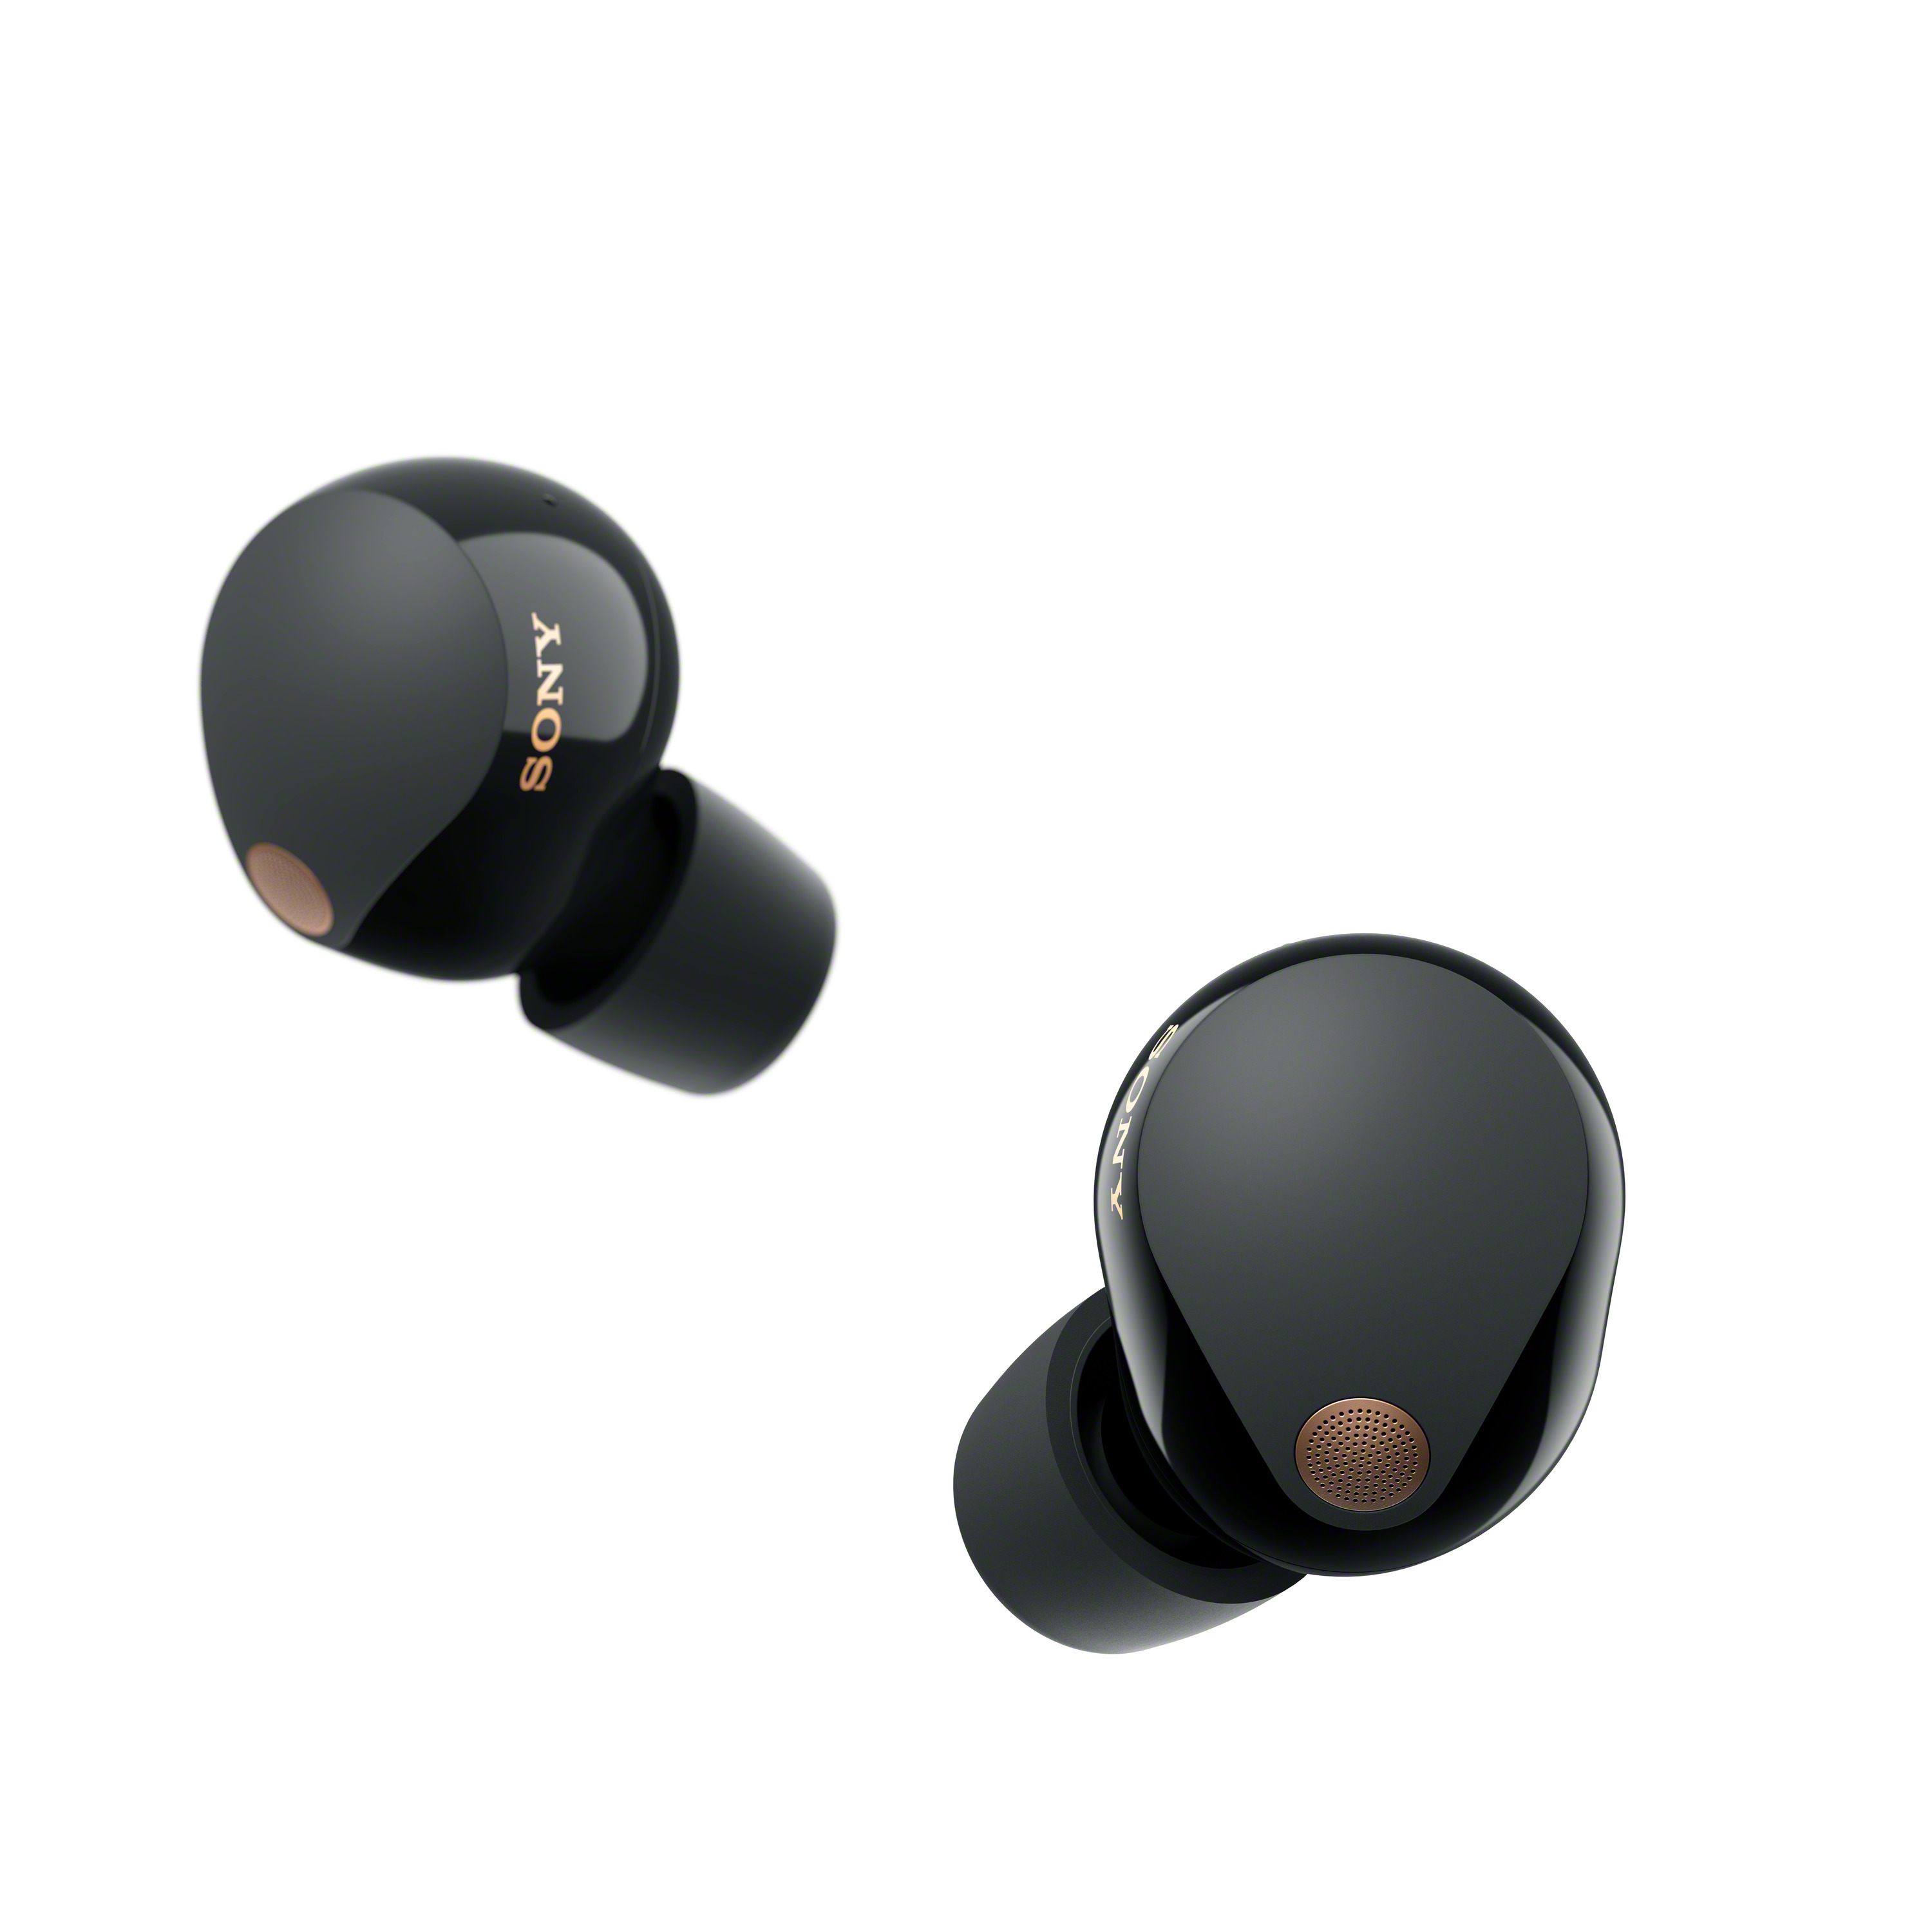 Sony WF-1000XM5 The Best Truly Wireless Bluetooth Noise Canceling Earbuds Headphones, Black - image 1 of 14